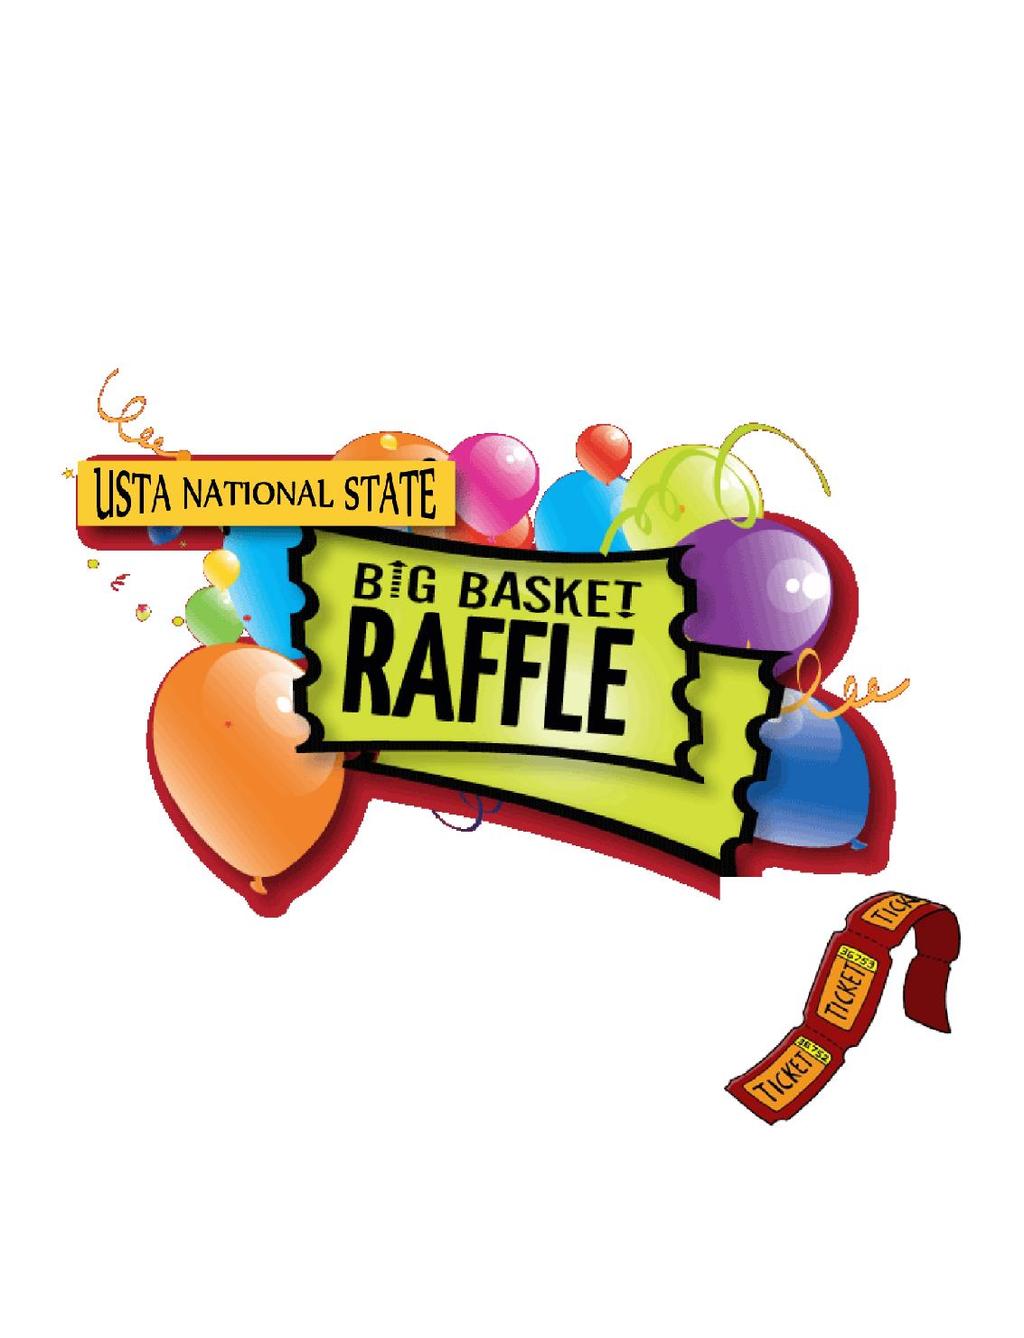 START PLANNING YOUR STATE RAFFLE BASKET NOW! The Baskets were A HIT again last year.